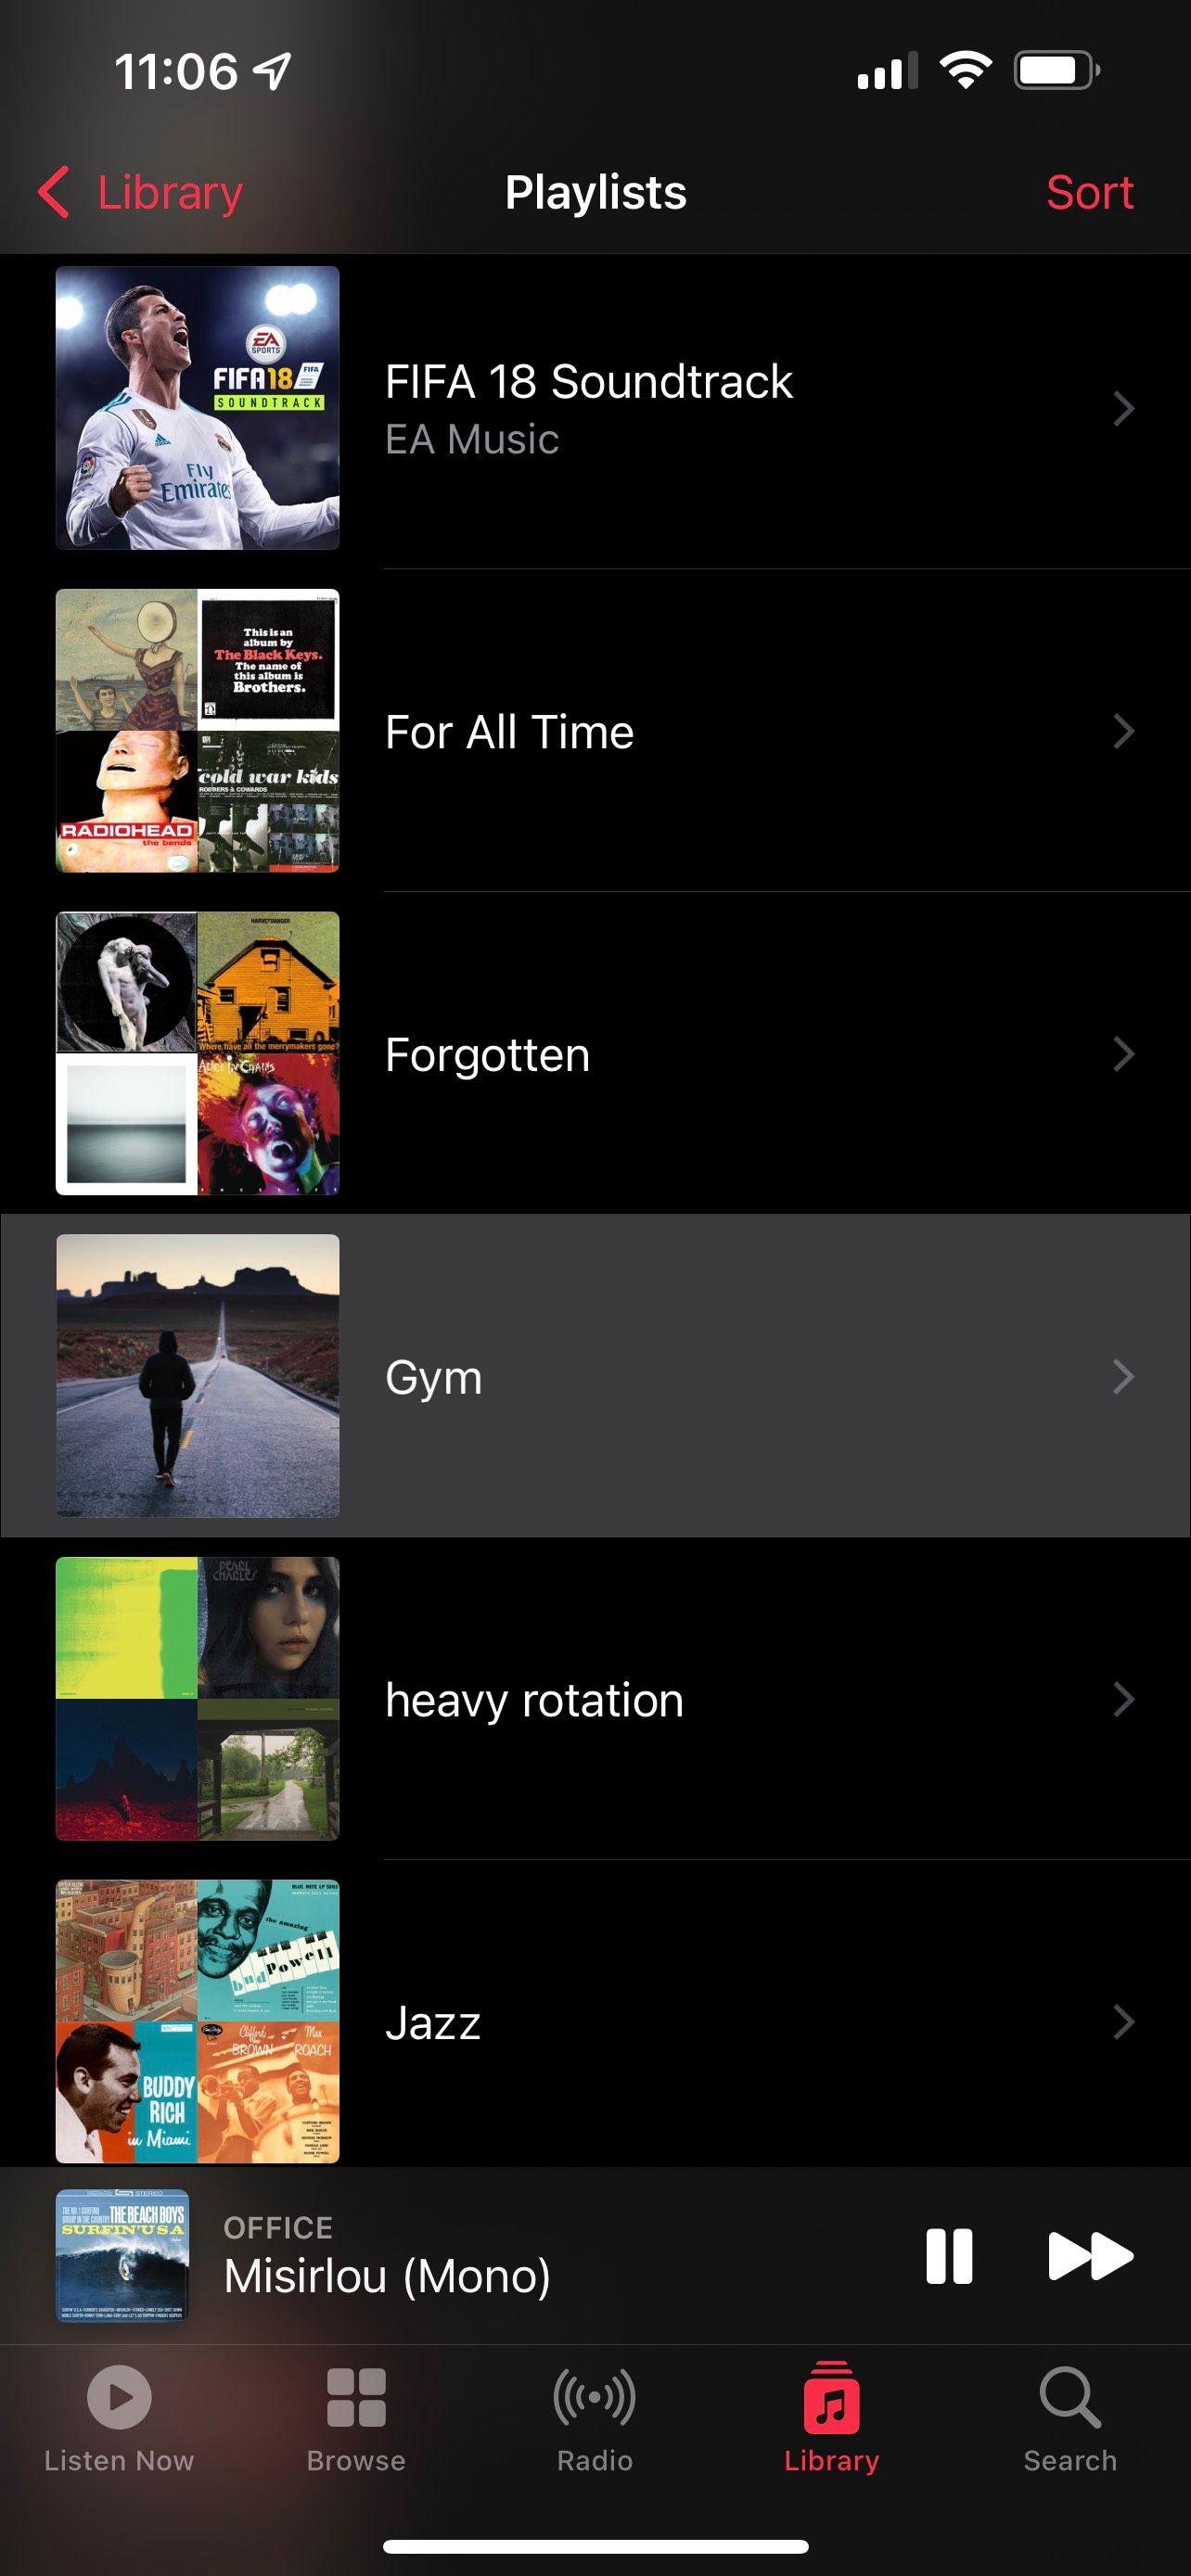 ios list of playlists selected